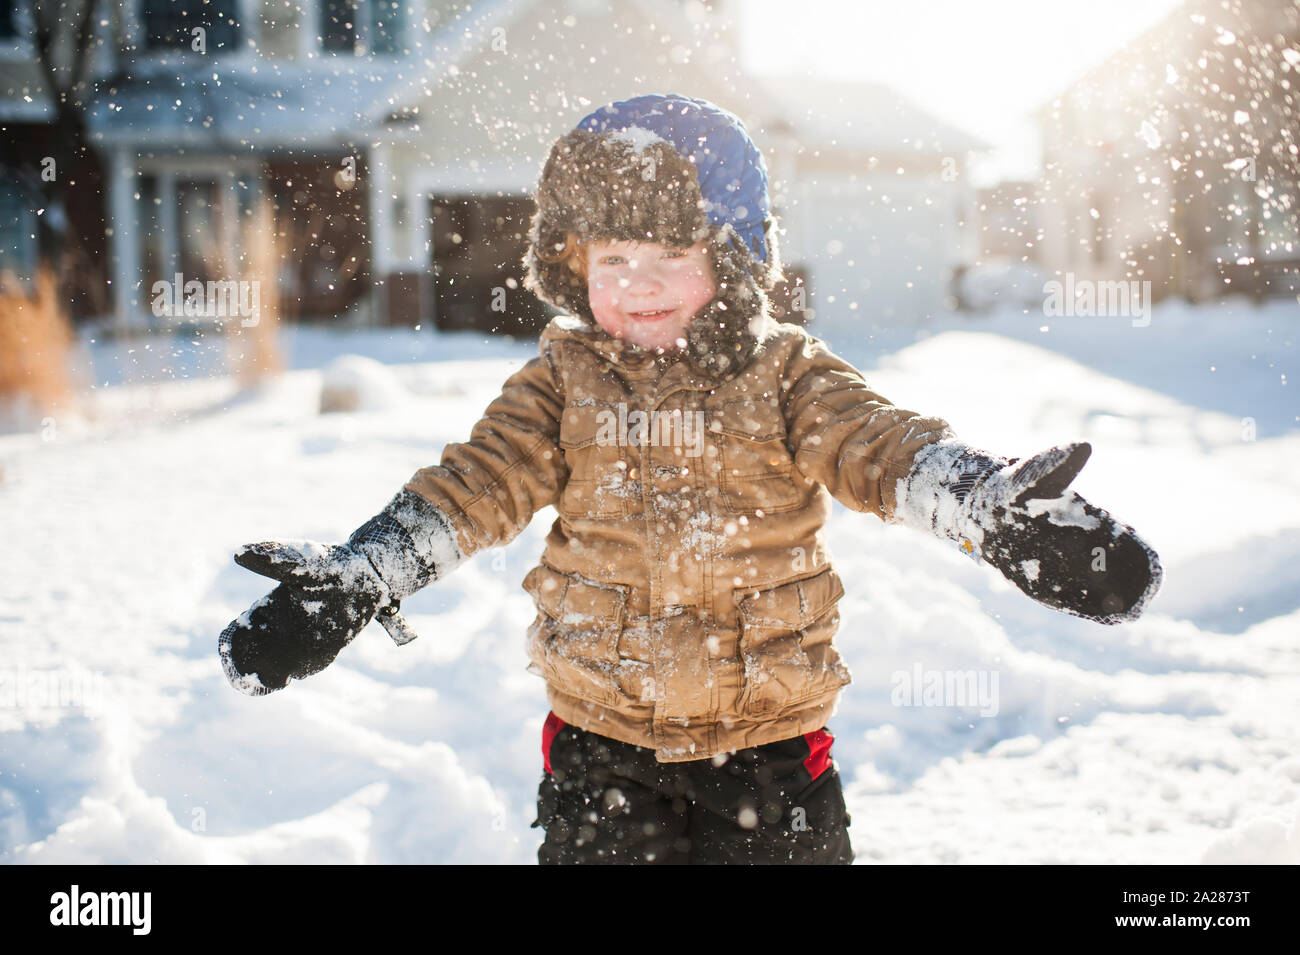 Toddler boy playing and smiling while throwing snow in front of house Stock Photo